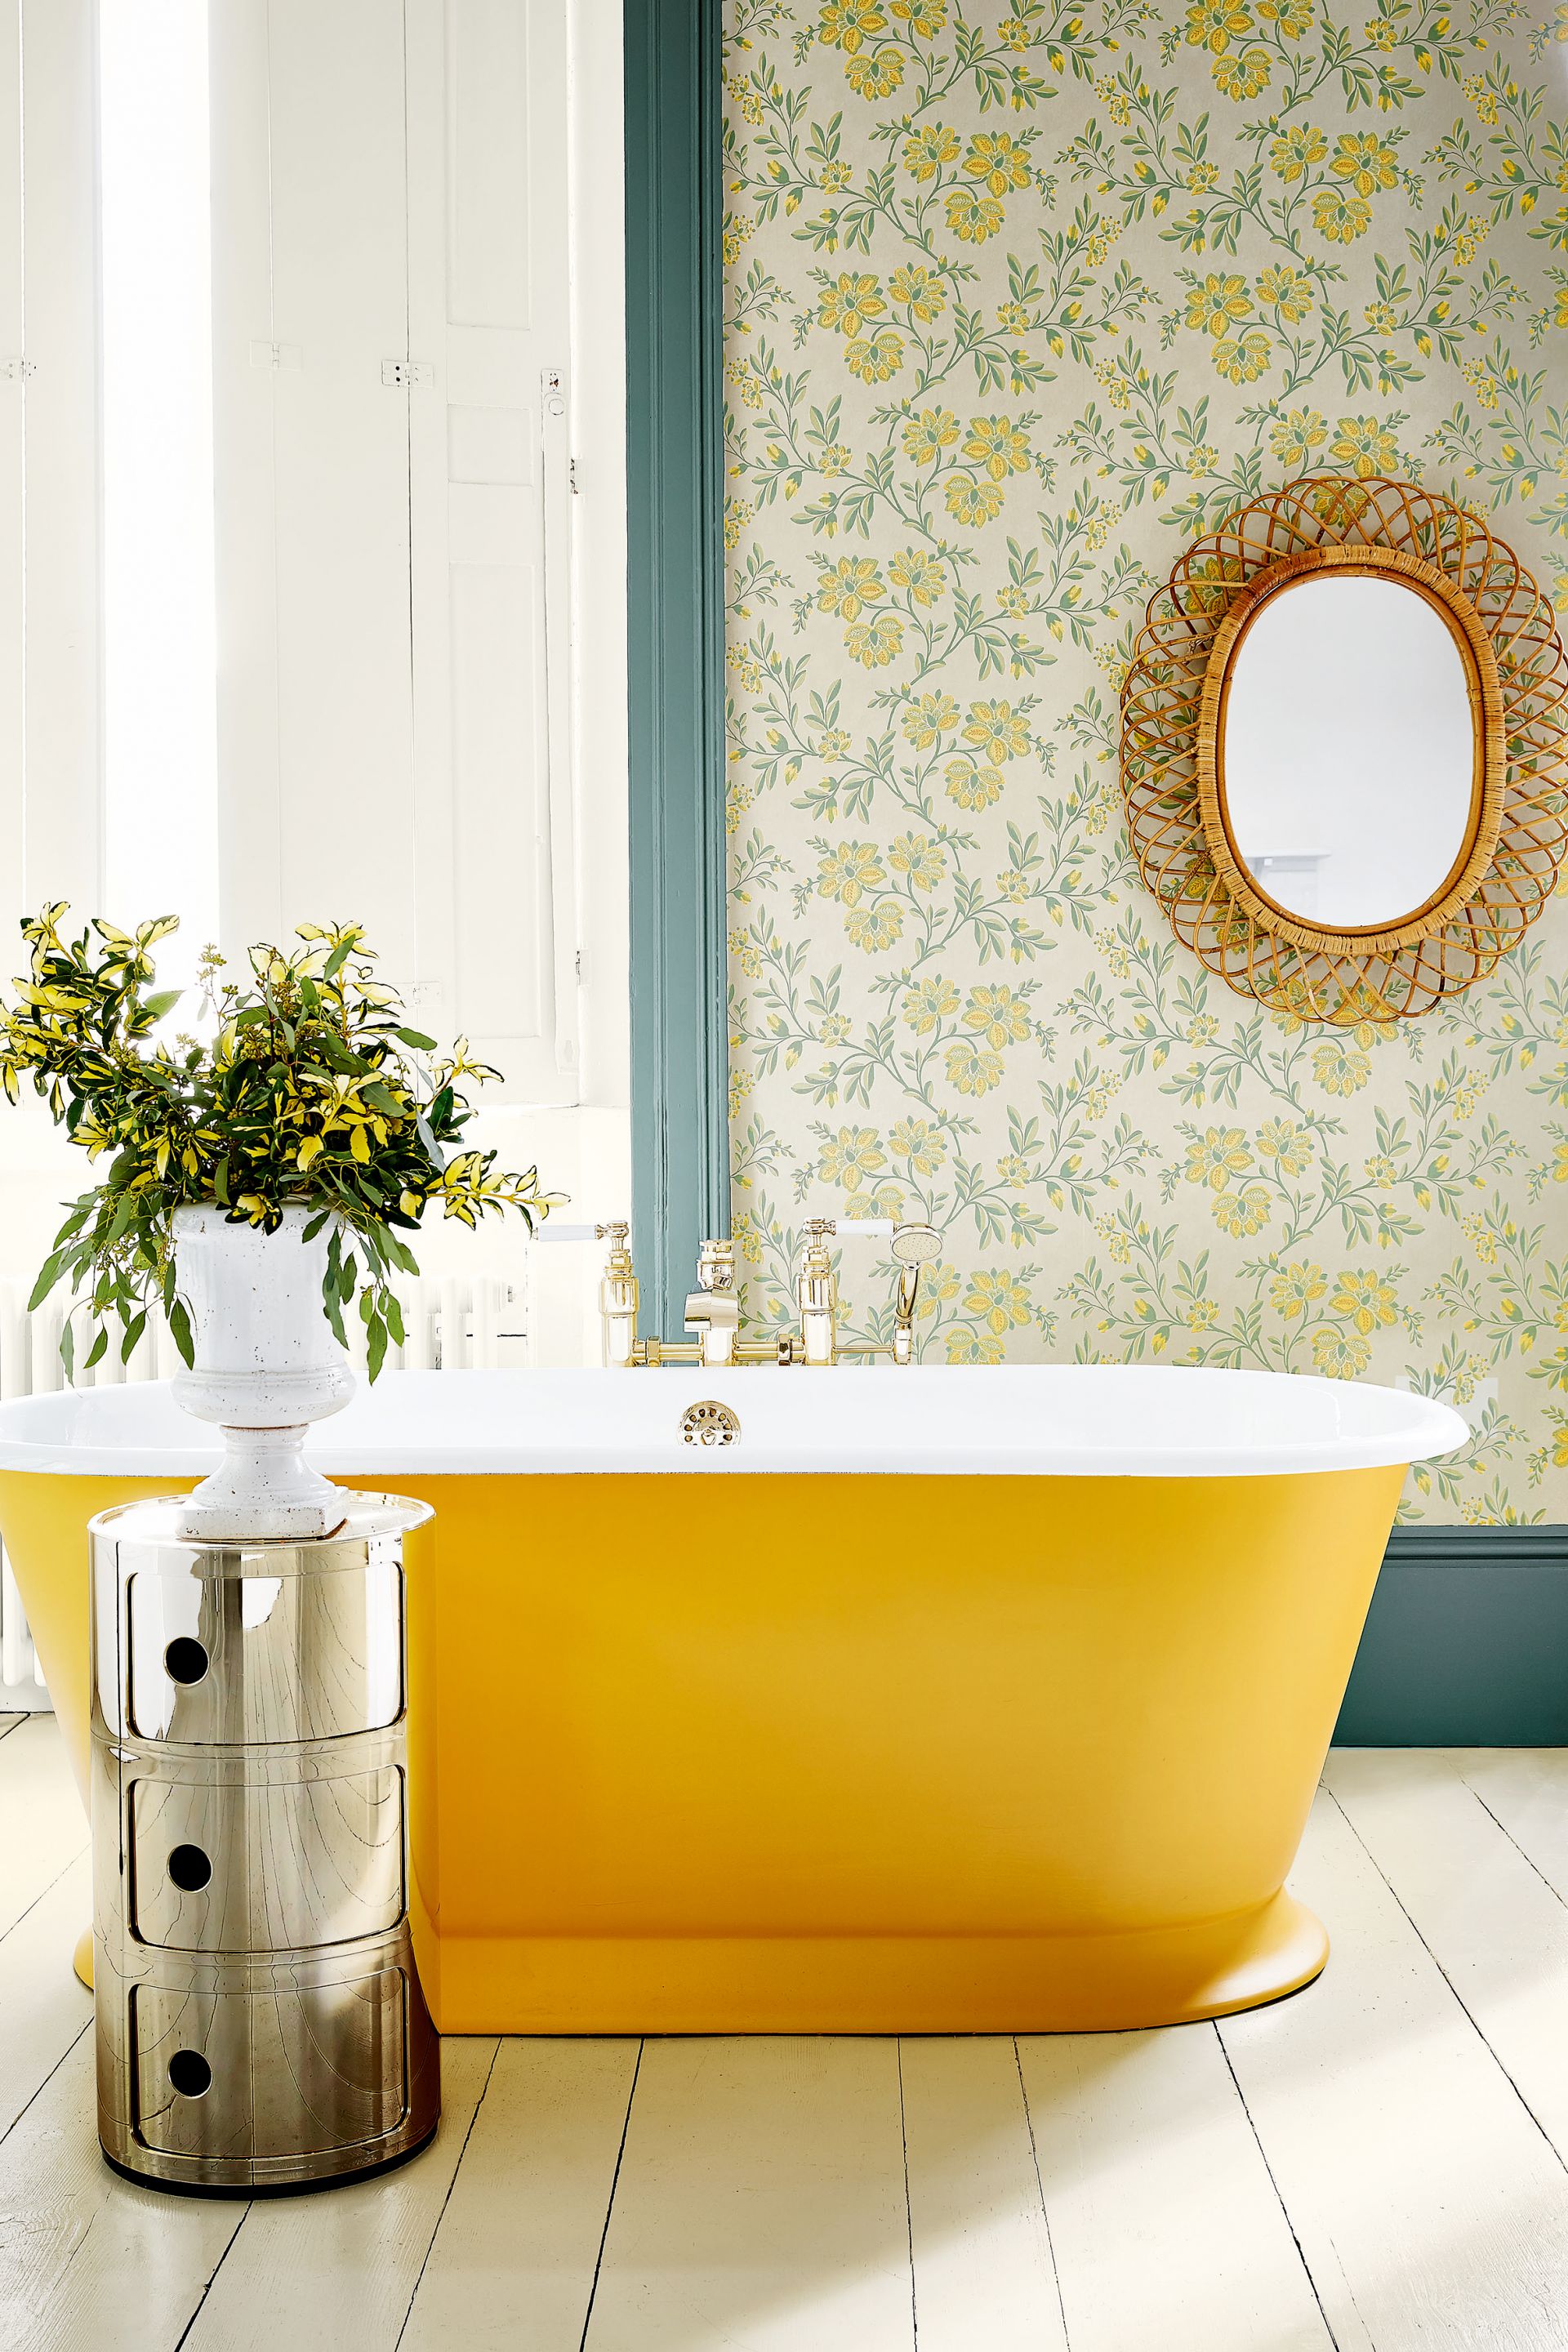 Make the family bathroom more vibrant with the highlight of a colorful bathtub - Photo 13.